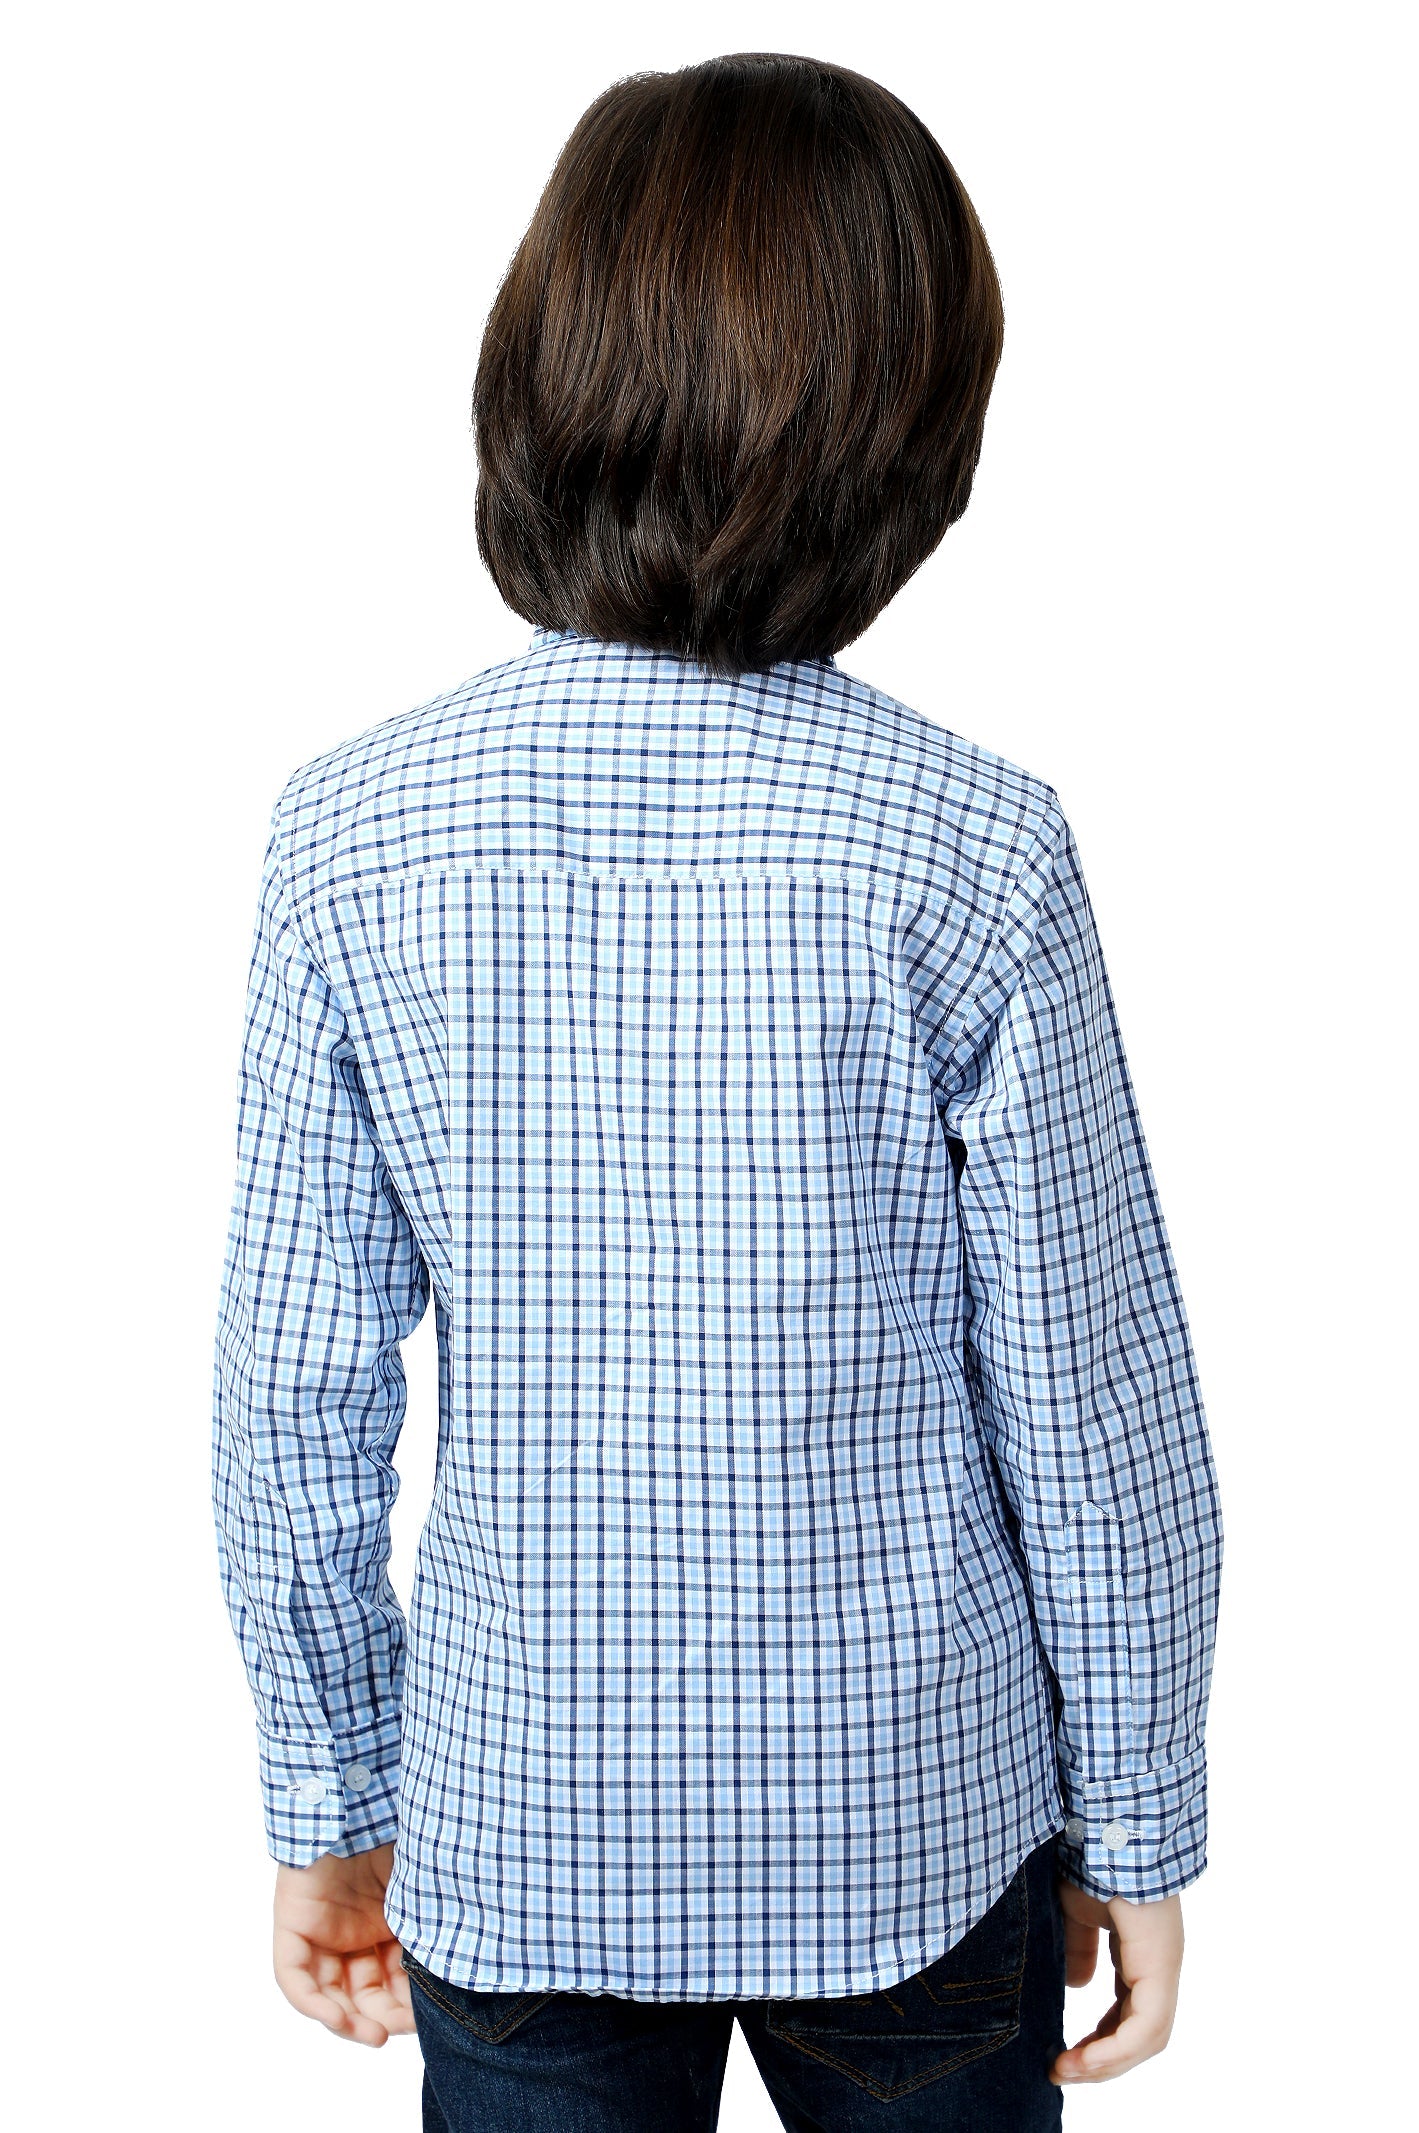 Boys Casual Shirt In White SKU: KBB-0352-WHITE - Diners